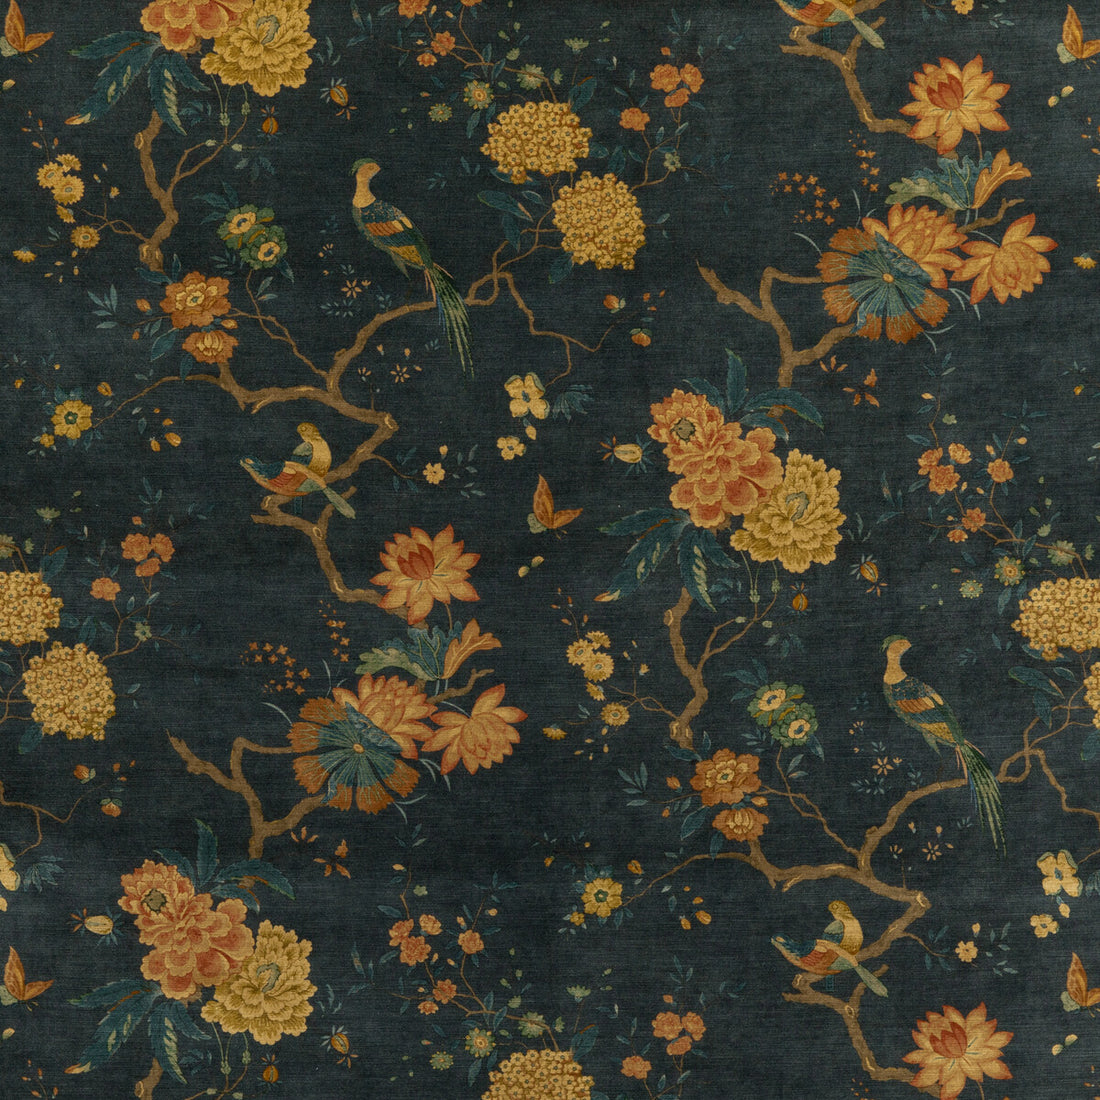 Oriental Bird Velvet fabric in teal color - pattern BP10818.2.0 - by G P &amp; J Baker in the Signature Velvets collection